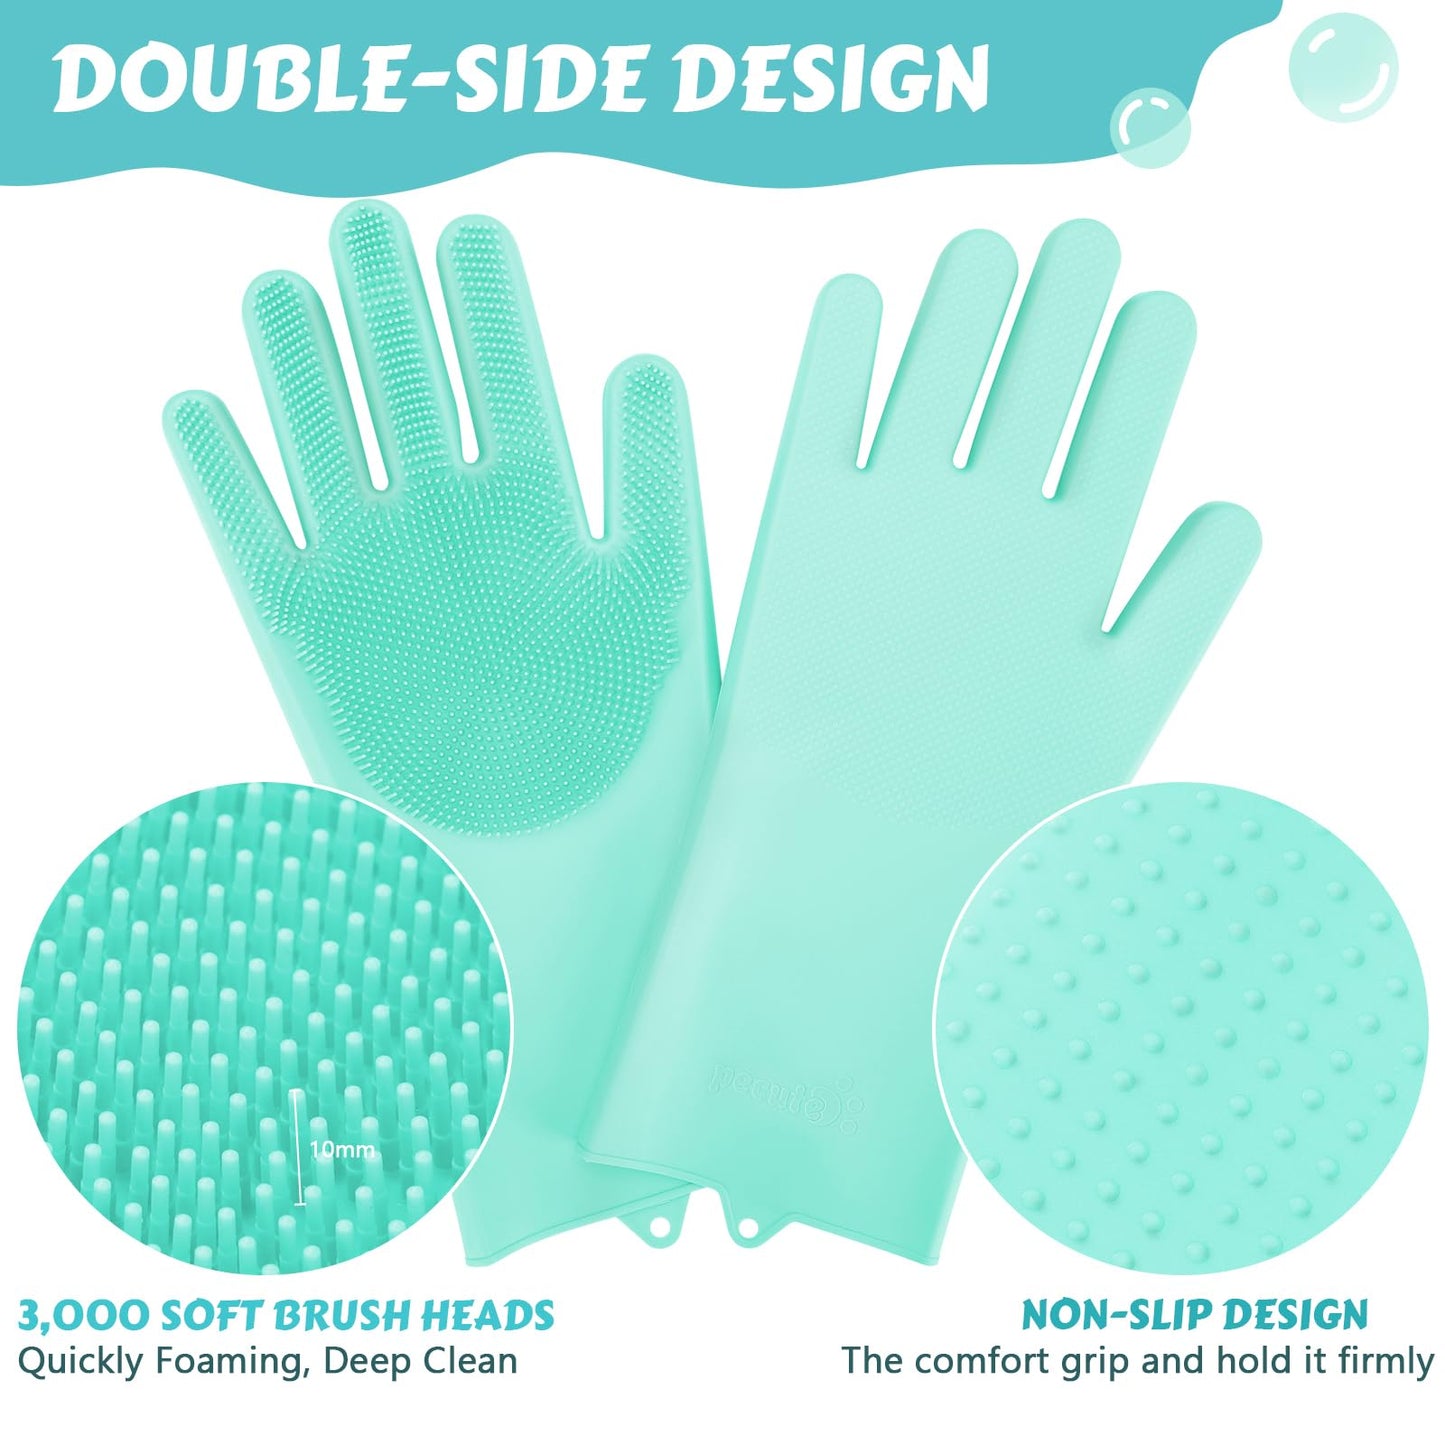 Pecute Pet Grooming Gloves, Heat Resistant Cat Bathing Gloves with High-Density Teeth, Silicone Dog Bathing Gloves with Enhanced Five Finger Design, Bathing and Massaging for Dogs and Cats